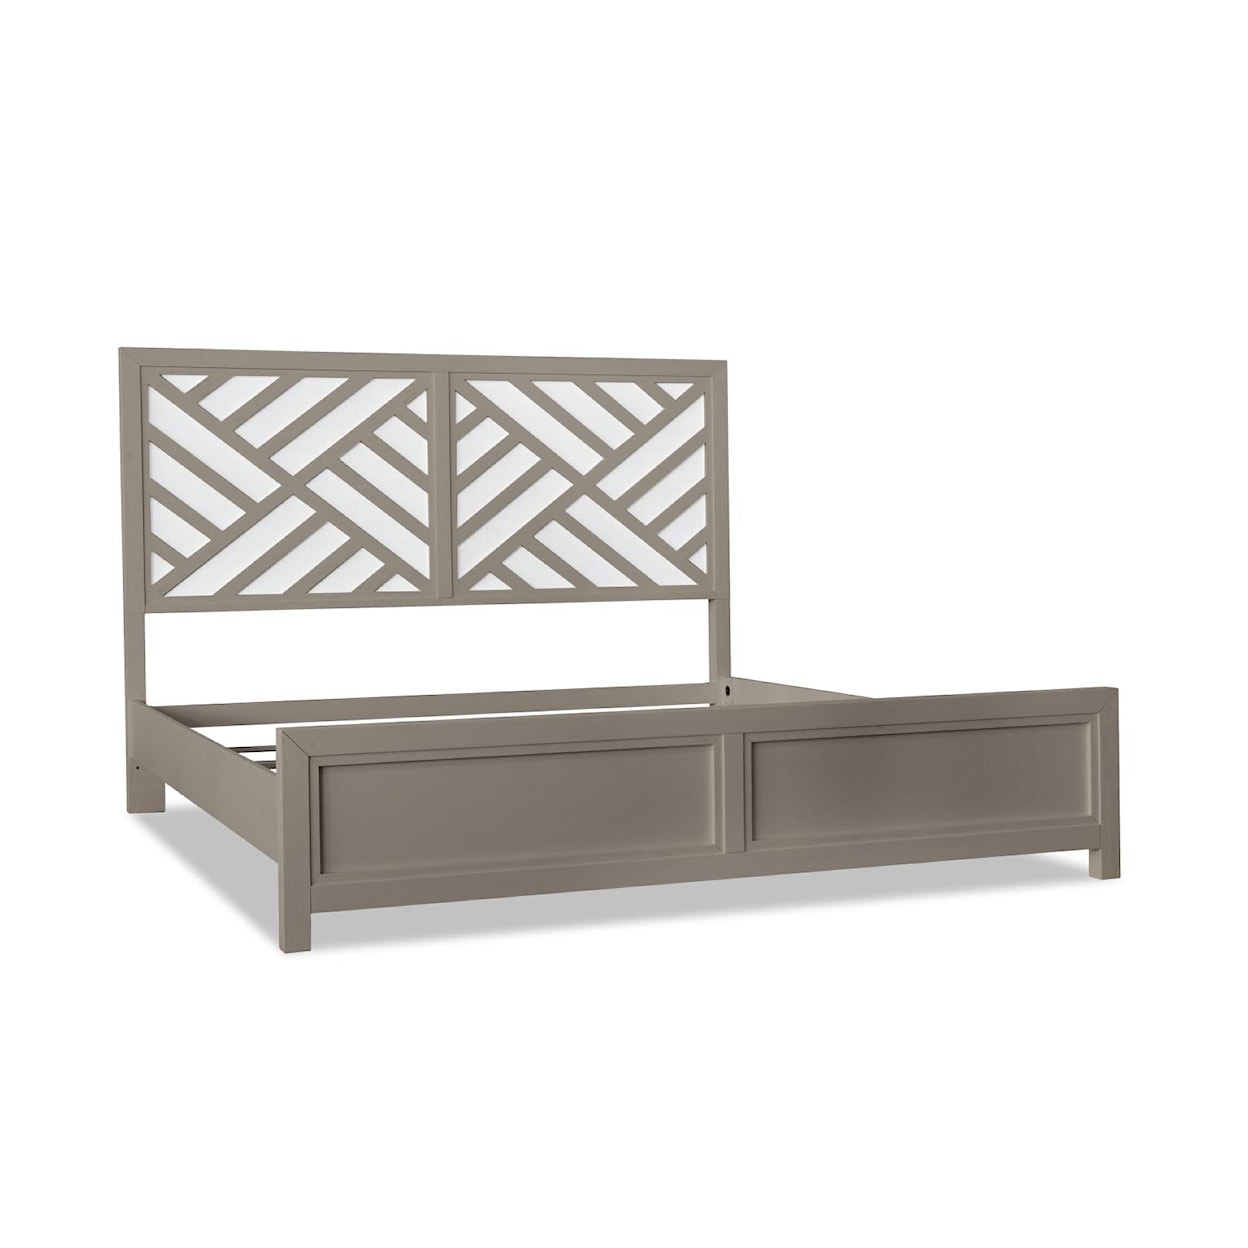 Trisha Yearwood Home Collection by Legacy Classic Staycation Panel Bed, Queen